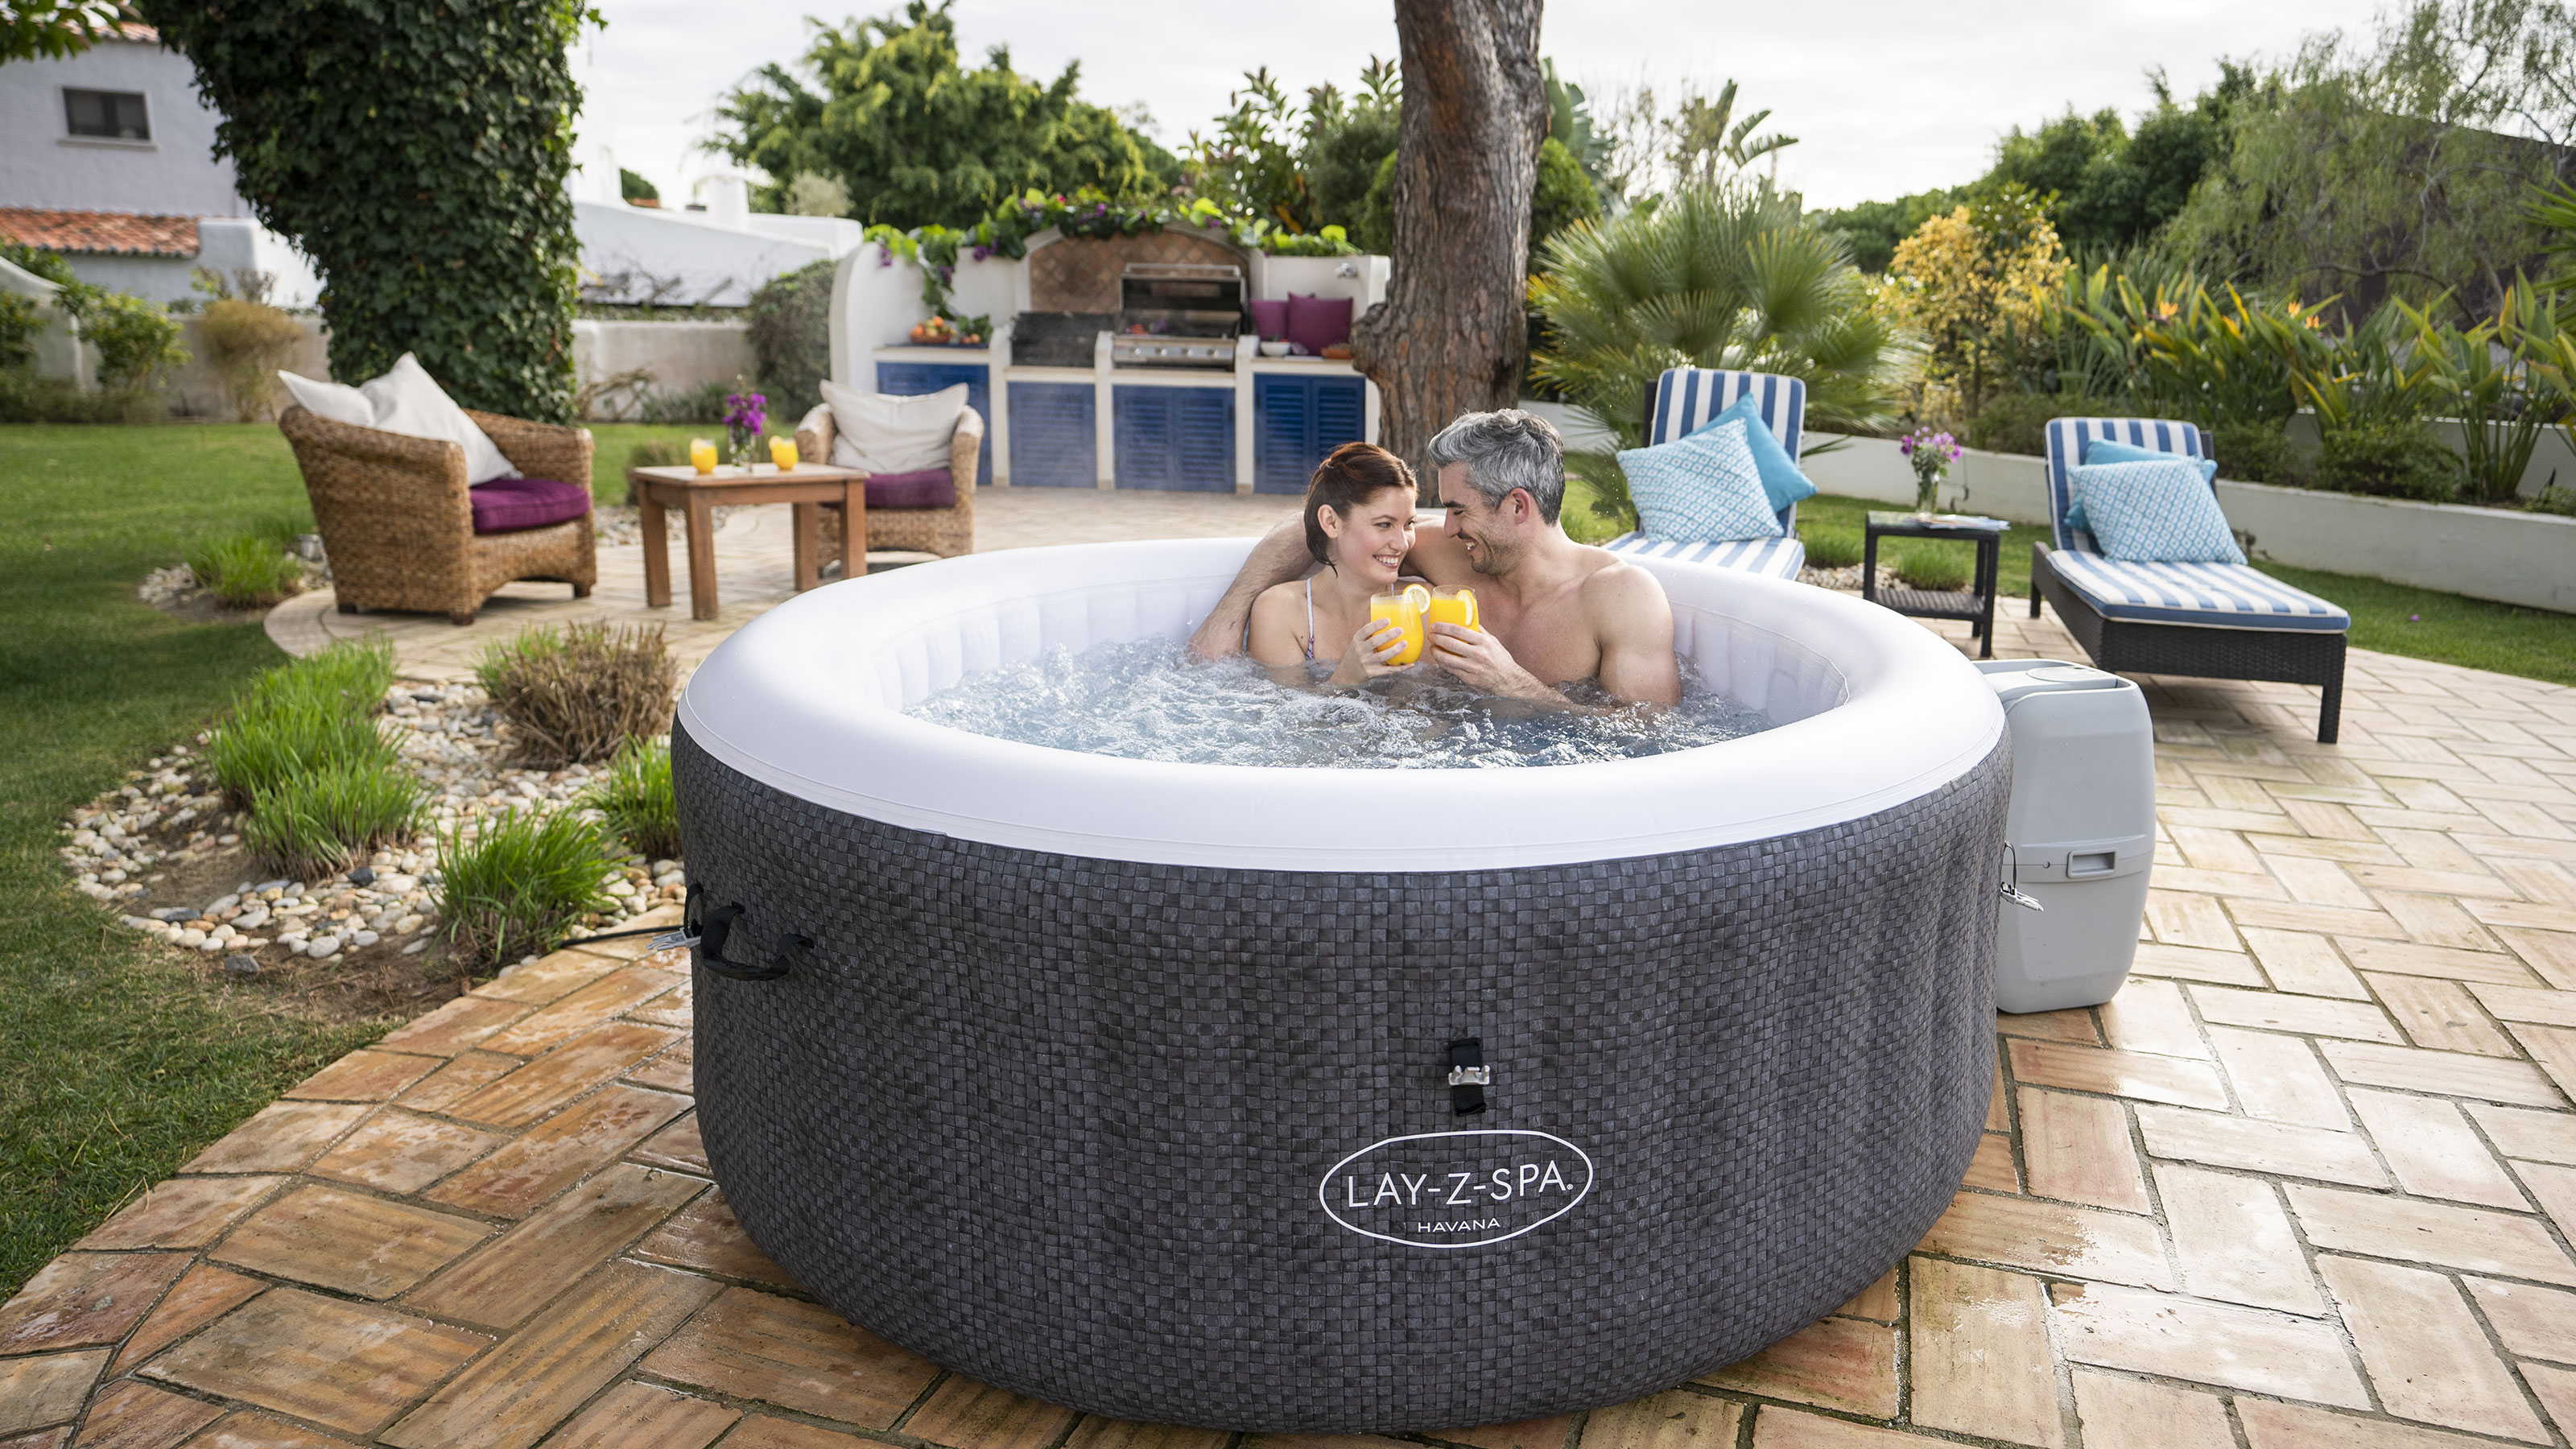 The Ultimate Secret Of Backyard Hot Tub Privacy